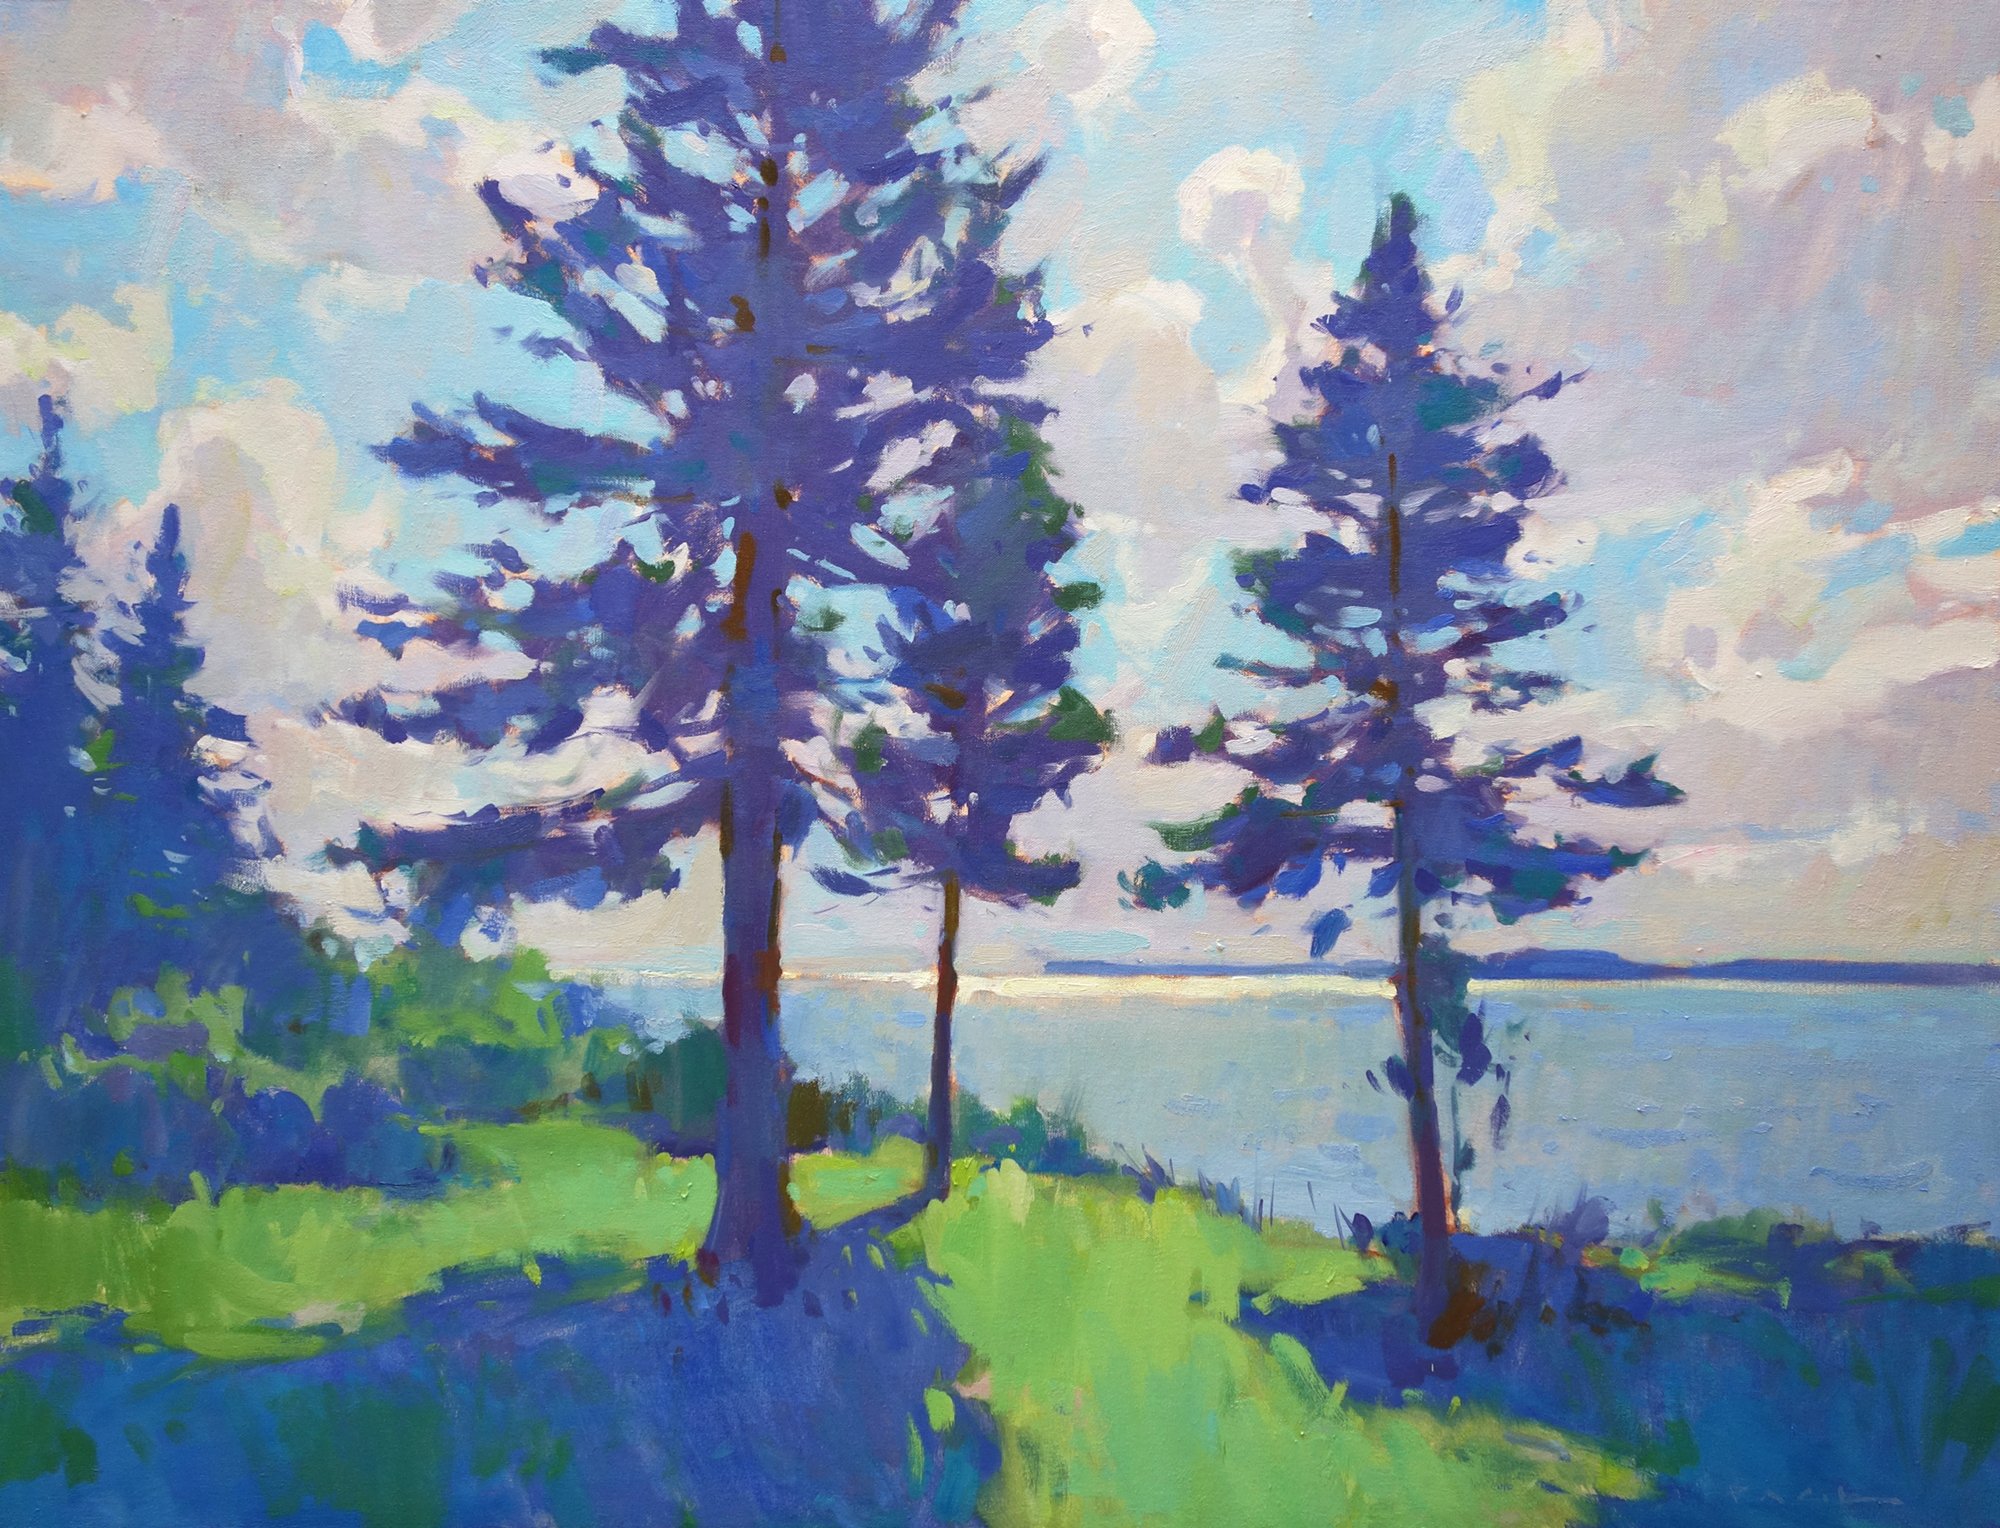  Into the Blue  30x40” oil on canvas 